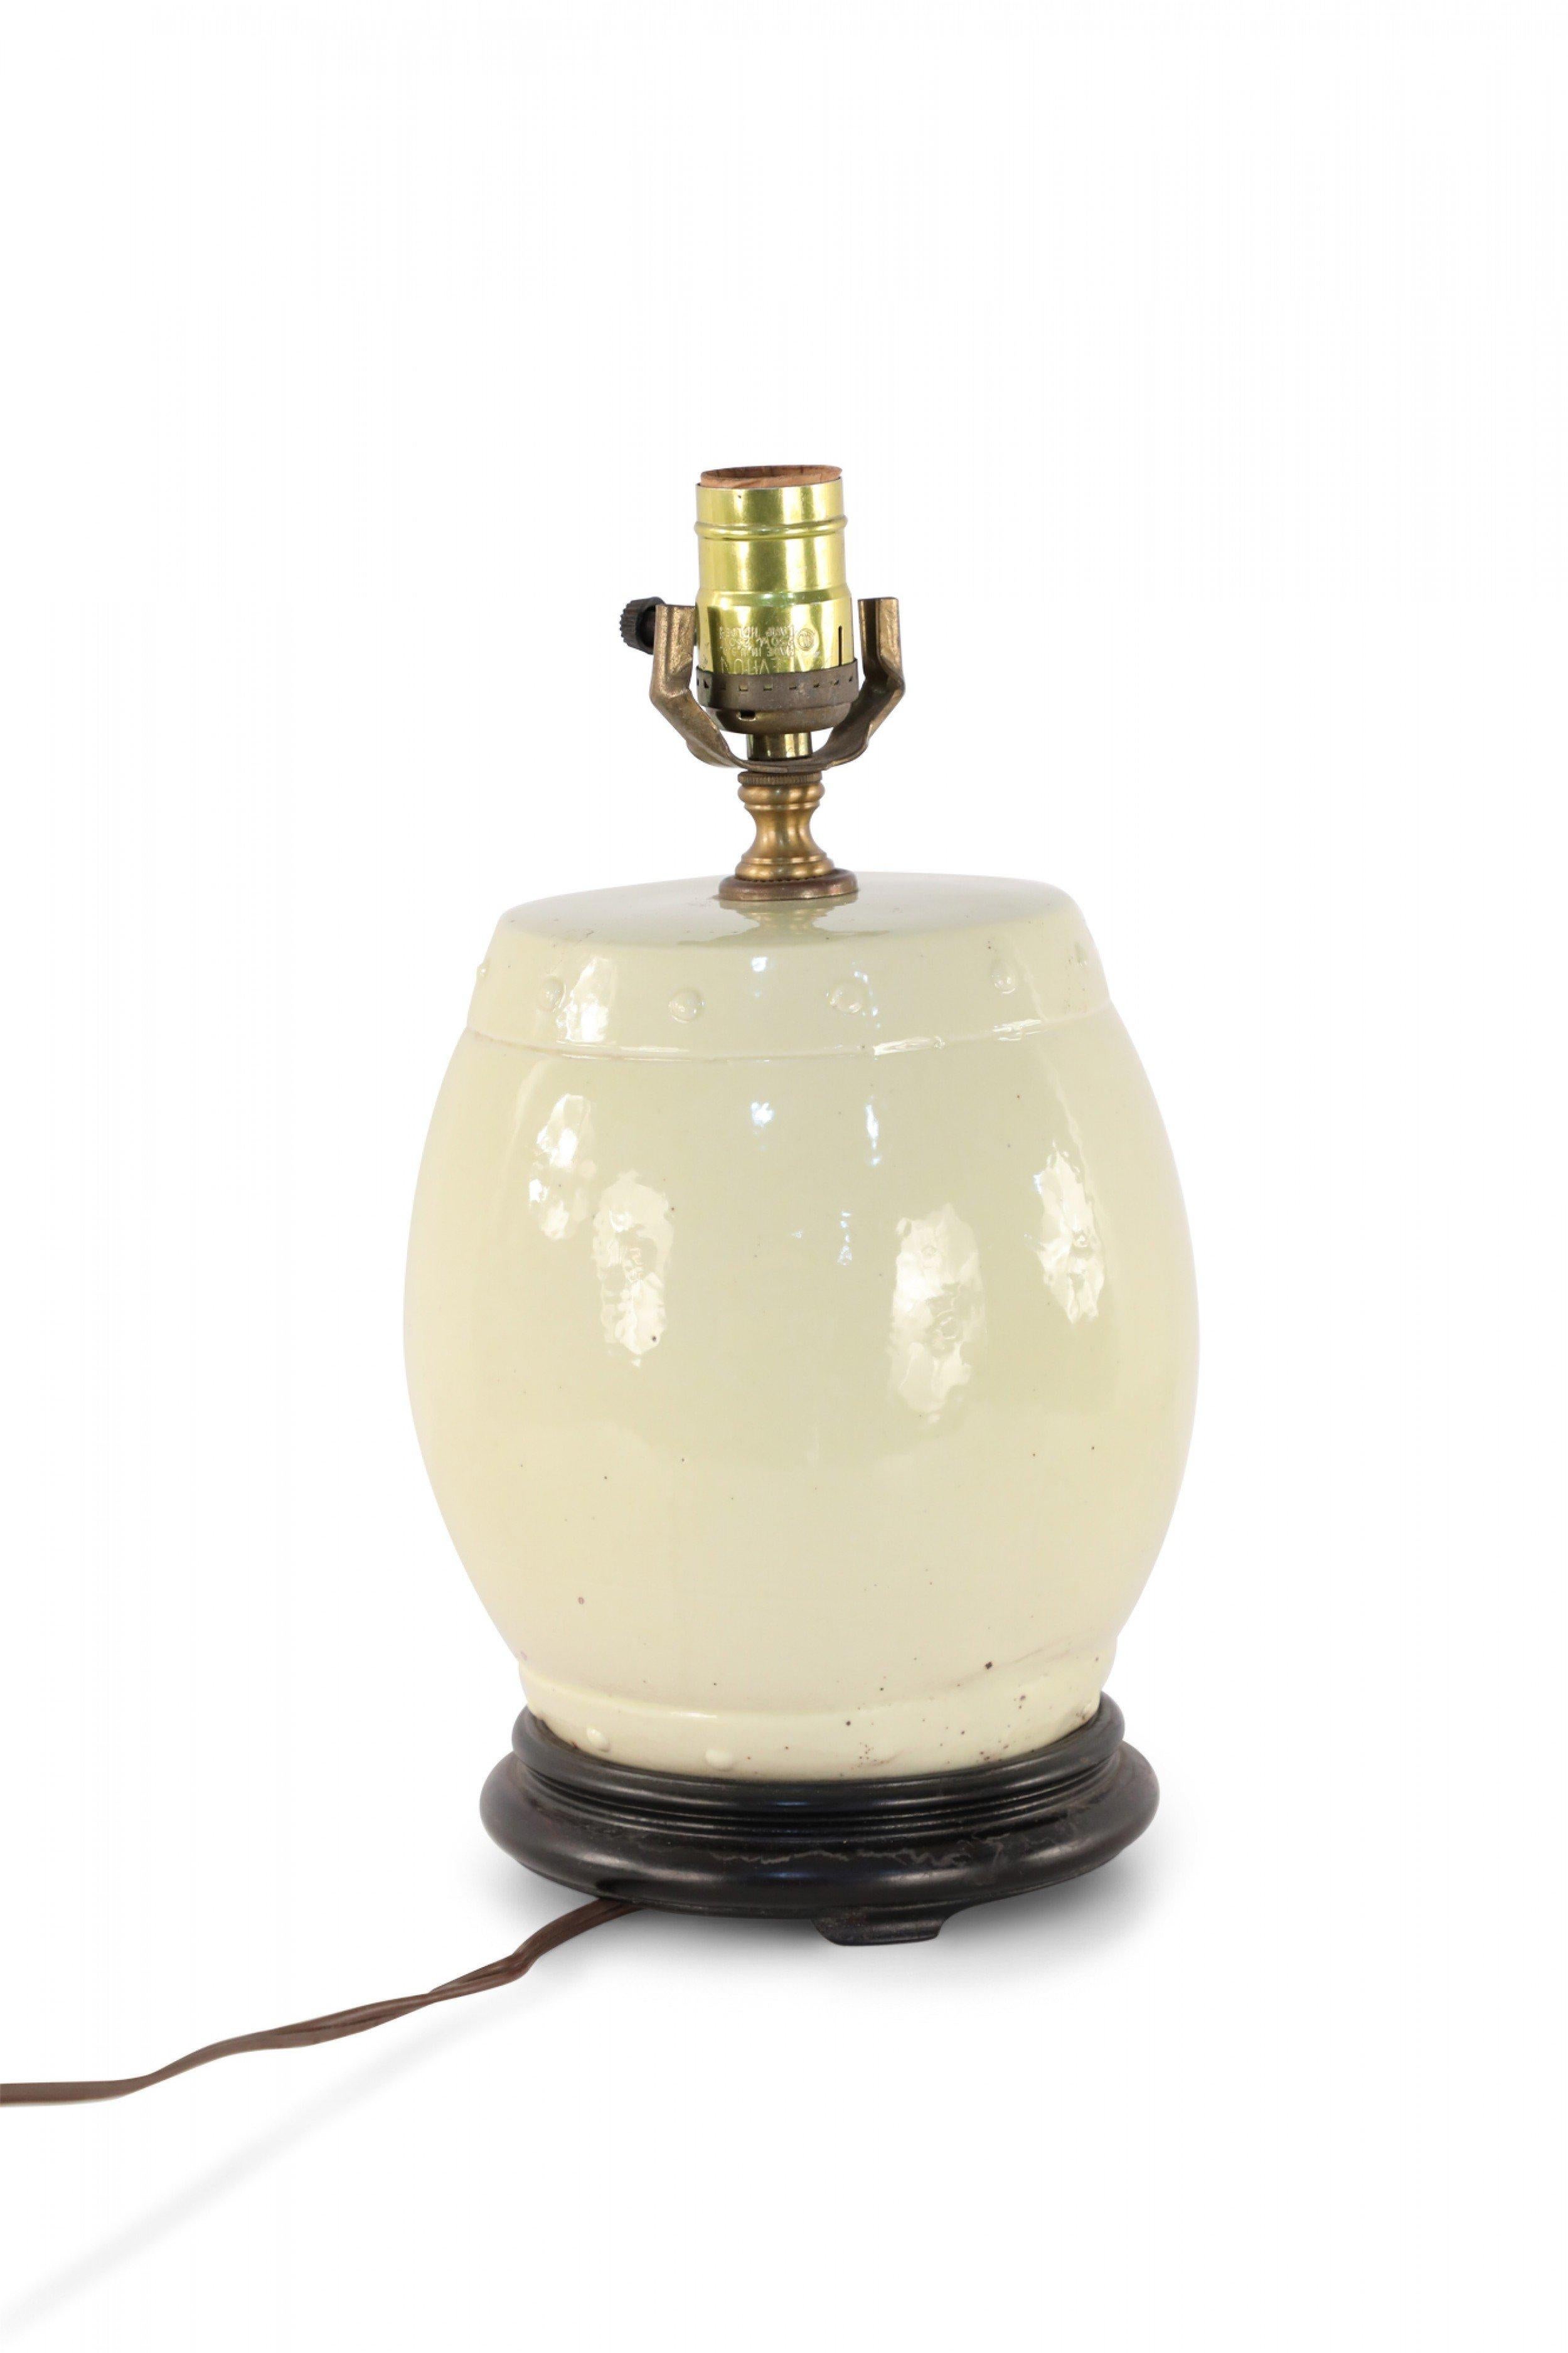 Chinese porcelain table lamp in a pale yellow hue and barrel shape on a wooden base with brass hardware. (Available in gray: NWL2002).
  